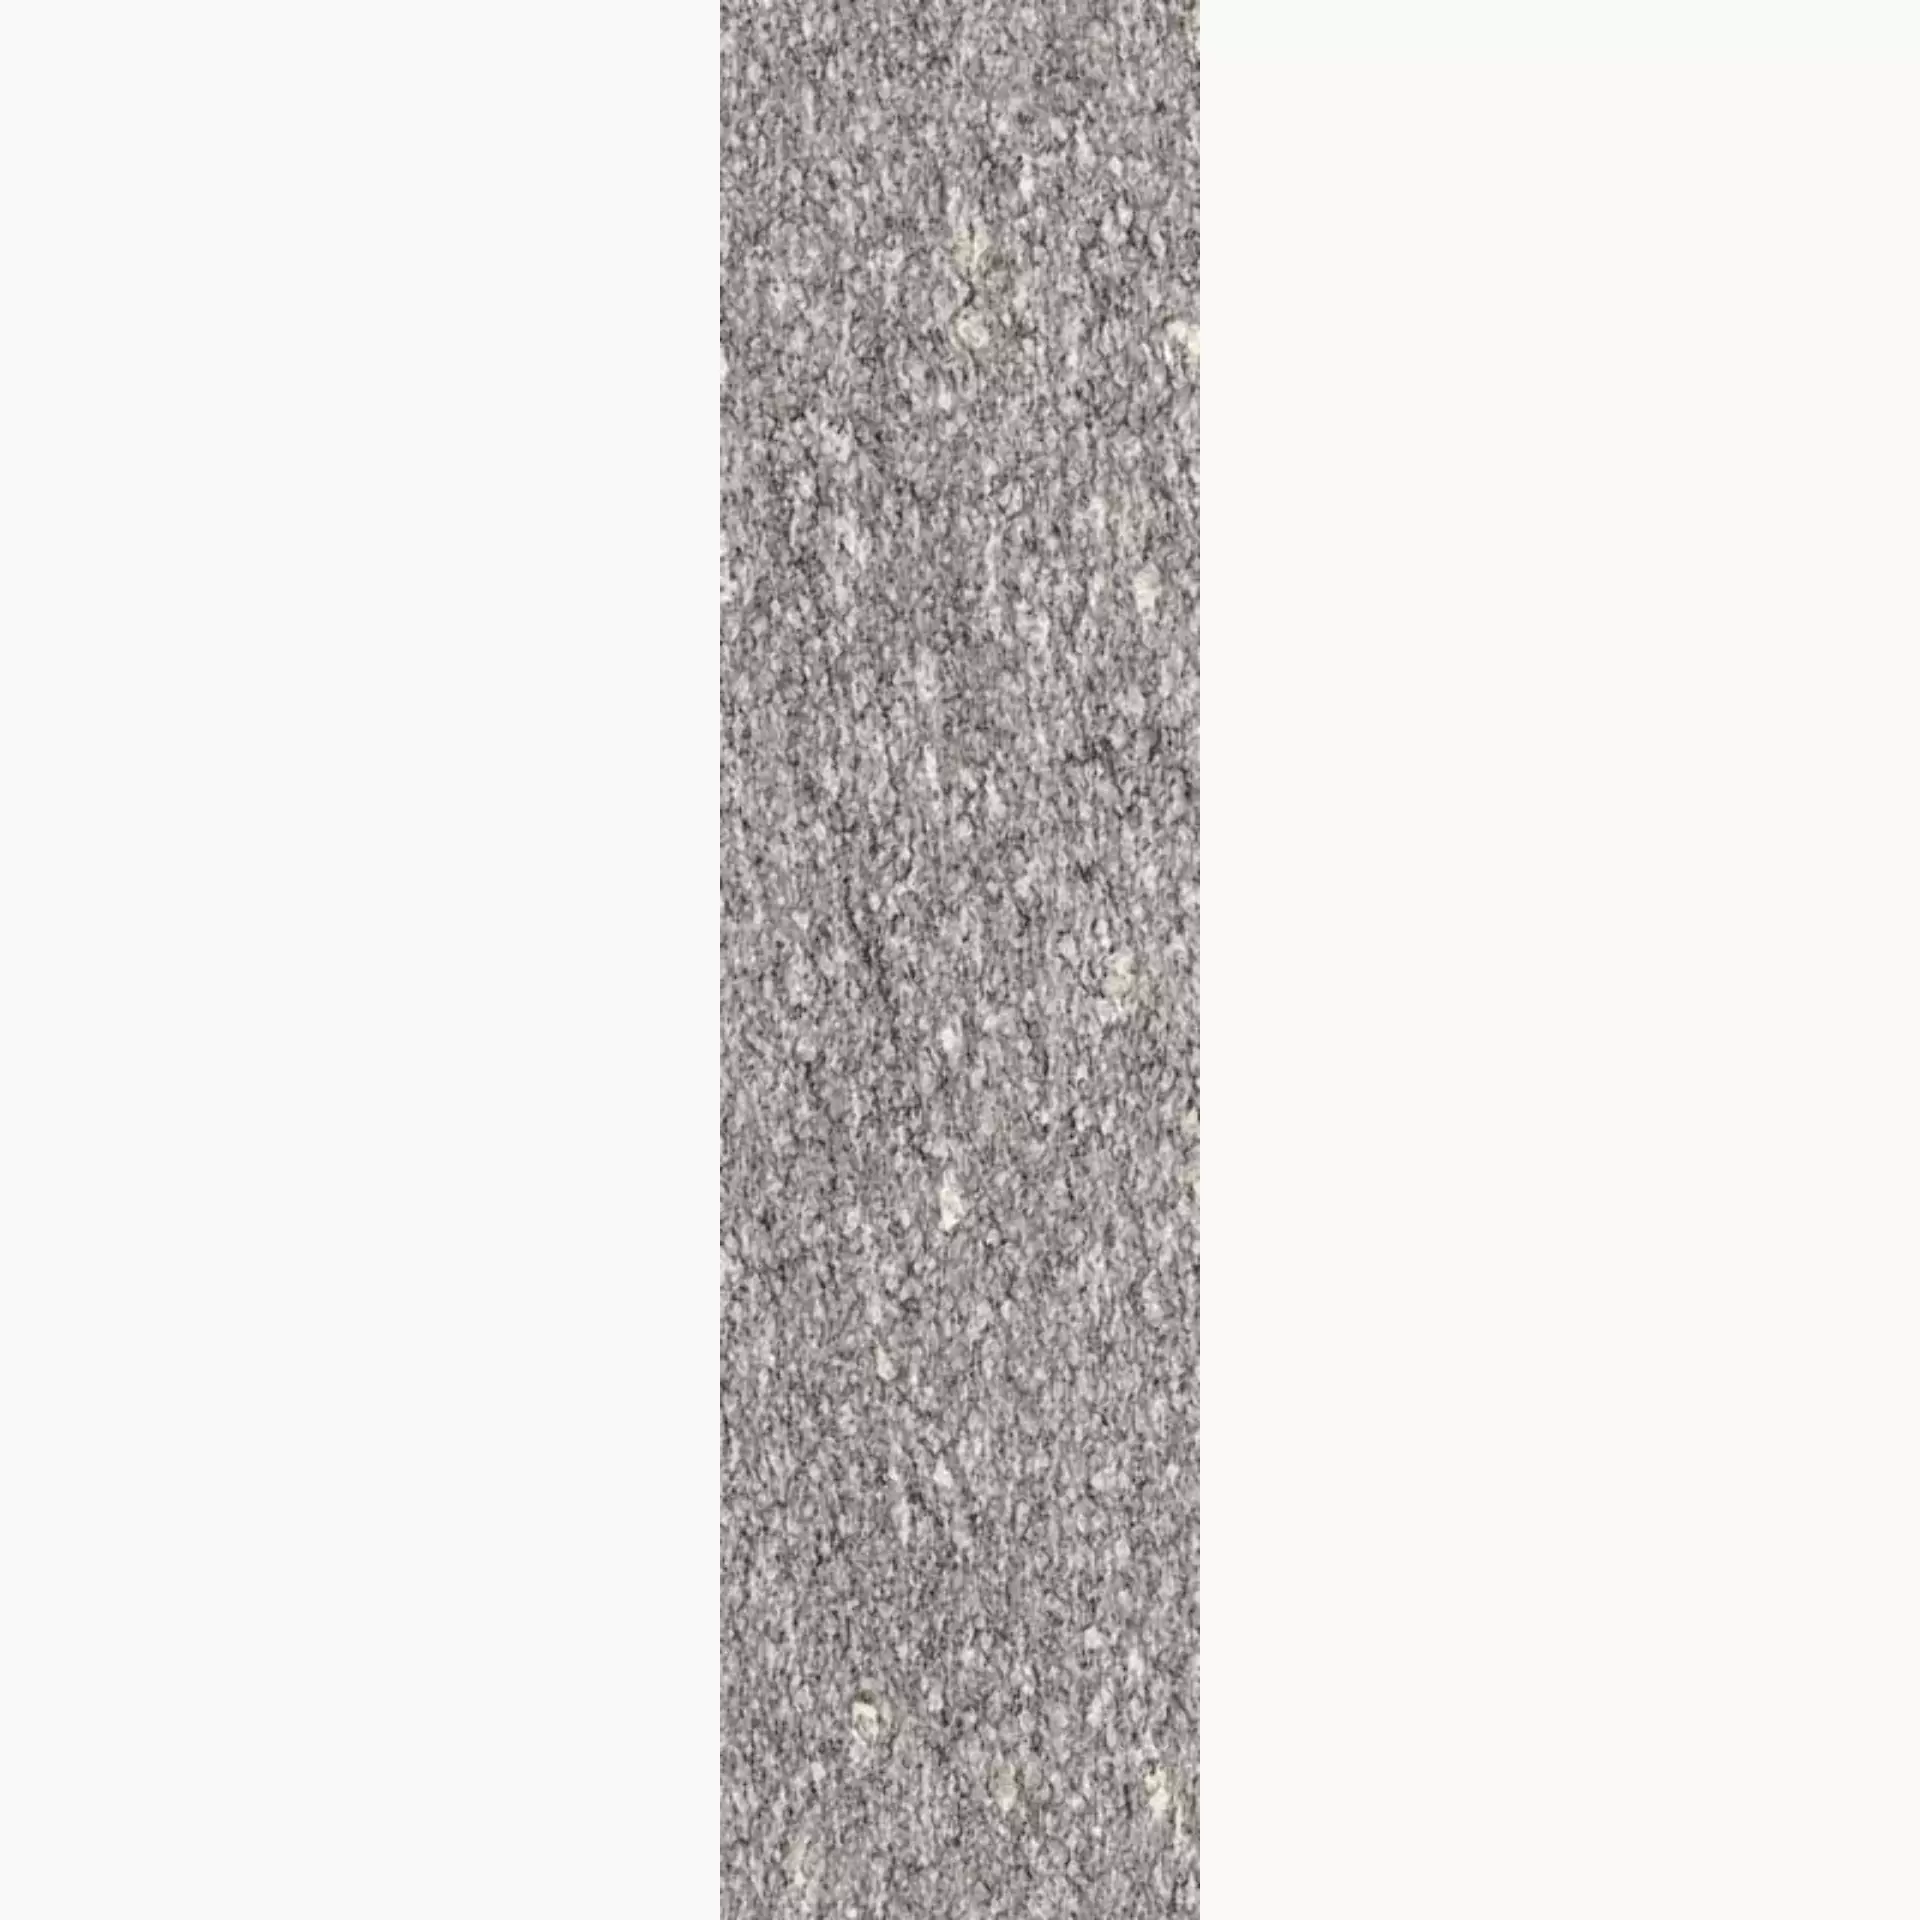 Sant Agostino Unionstone London Grey Natural CSALOGRY15 15x60cm rectified 10mm